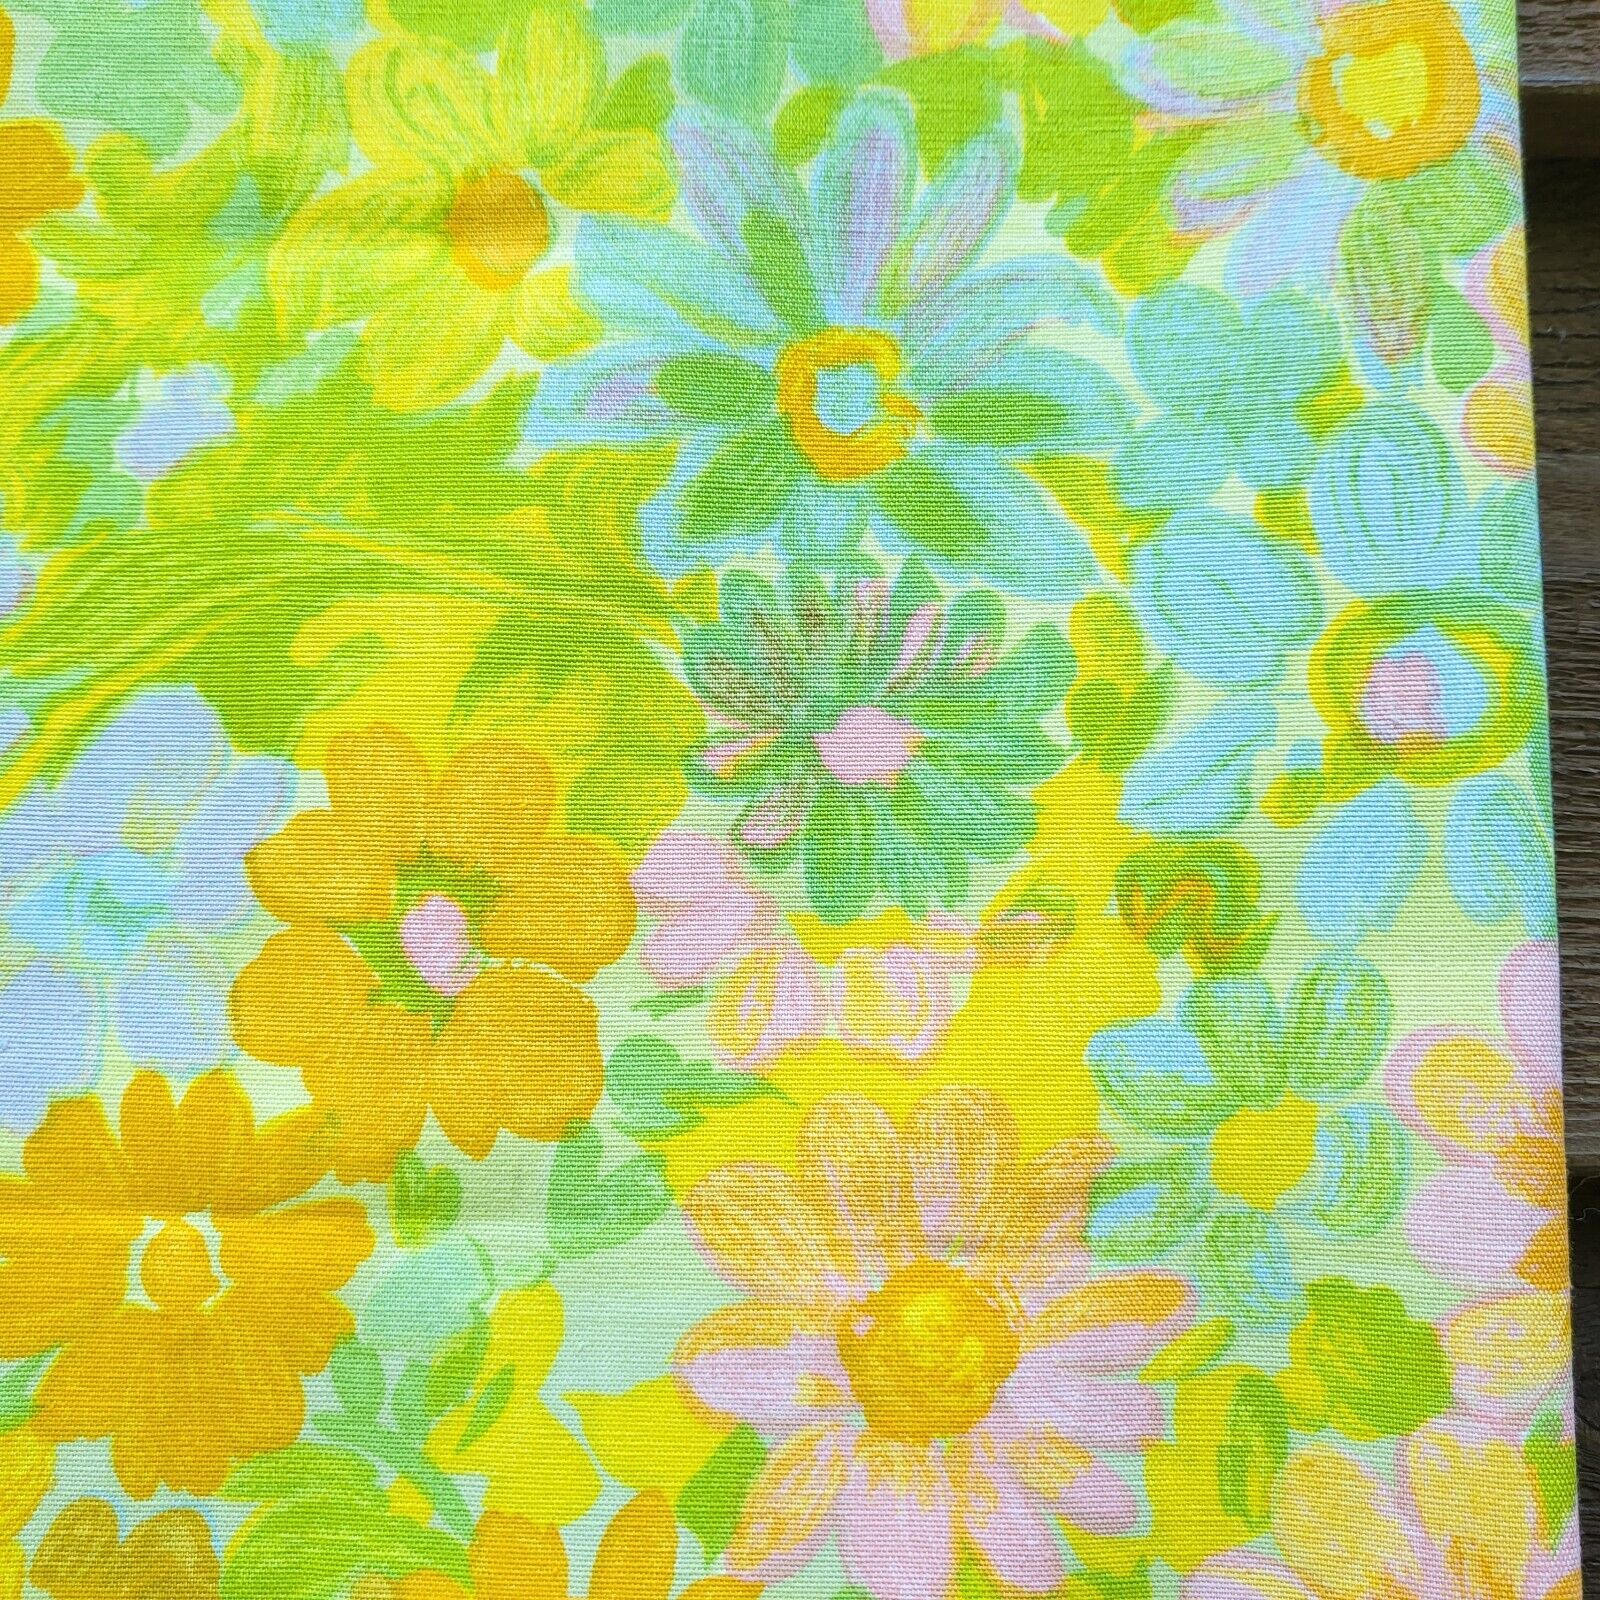 Vintage 1960s psychedelic floral print tablecloth